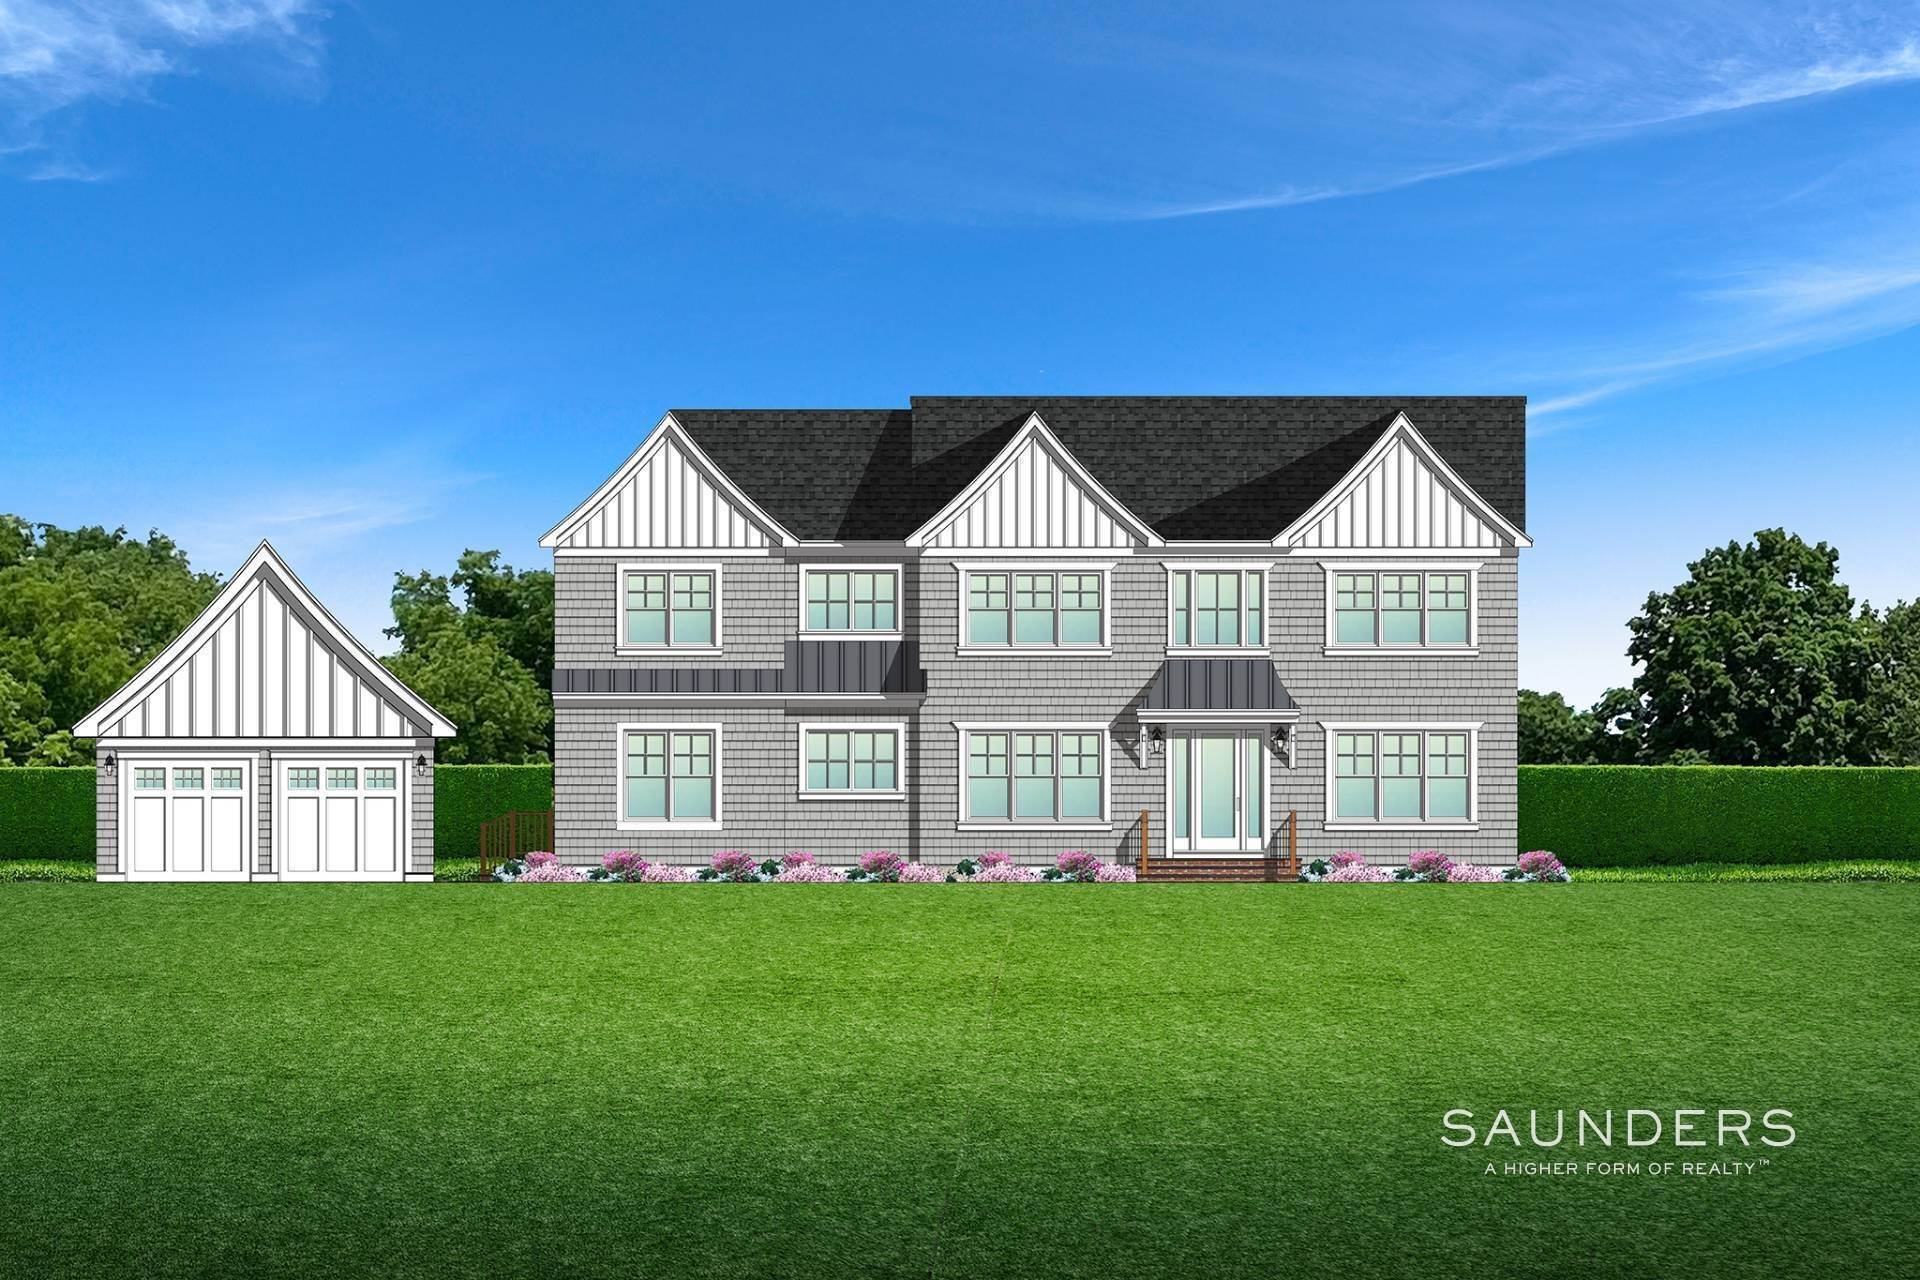 2. Single Family Homes for Sale at New Construction With Saltwater Pool In Desirable Quogue Village 46 Jessup Avenue, Quogue, NY 11959